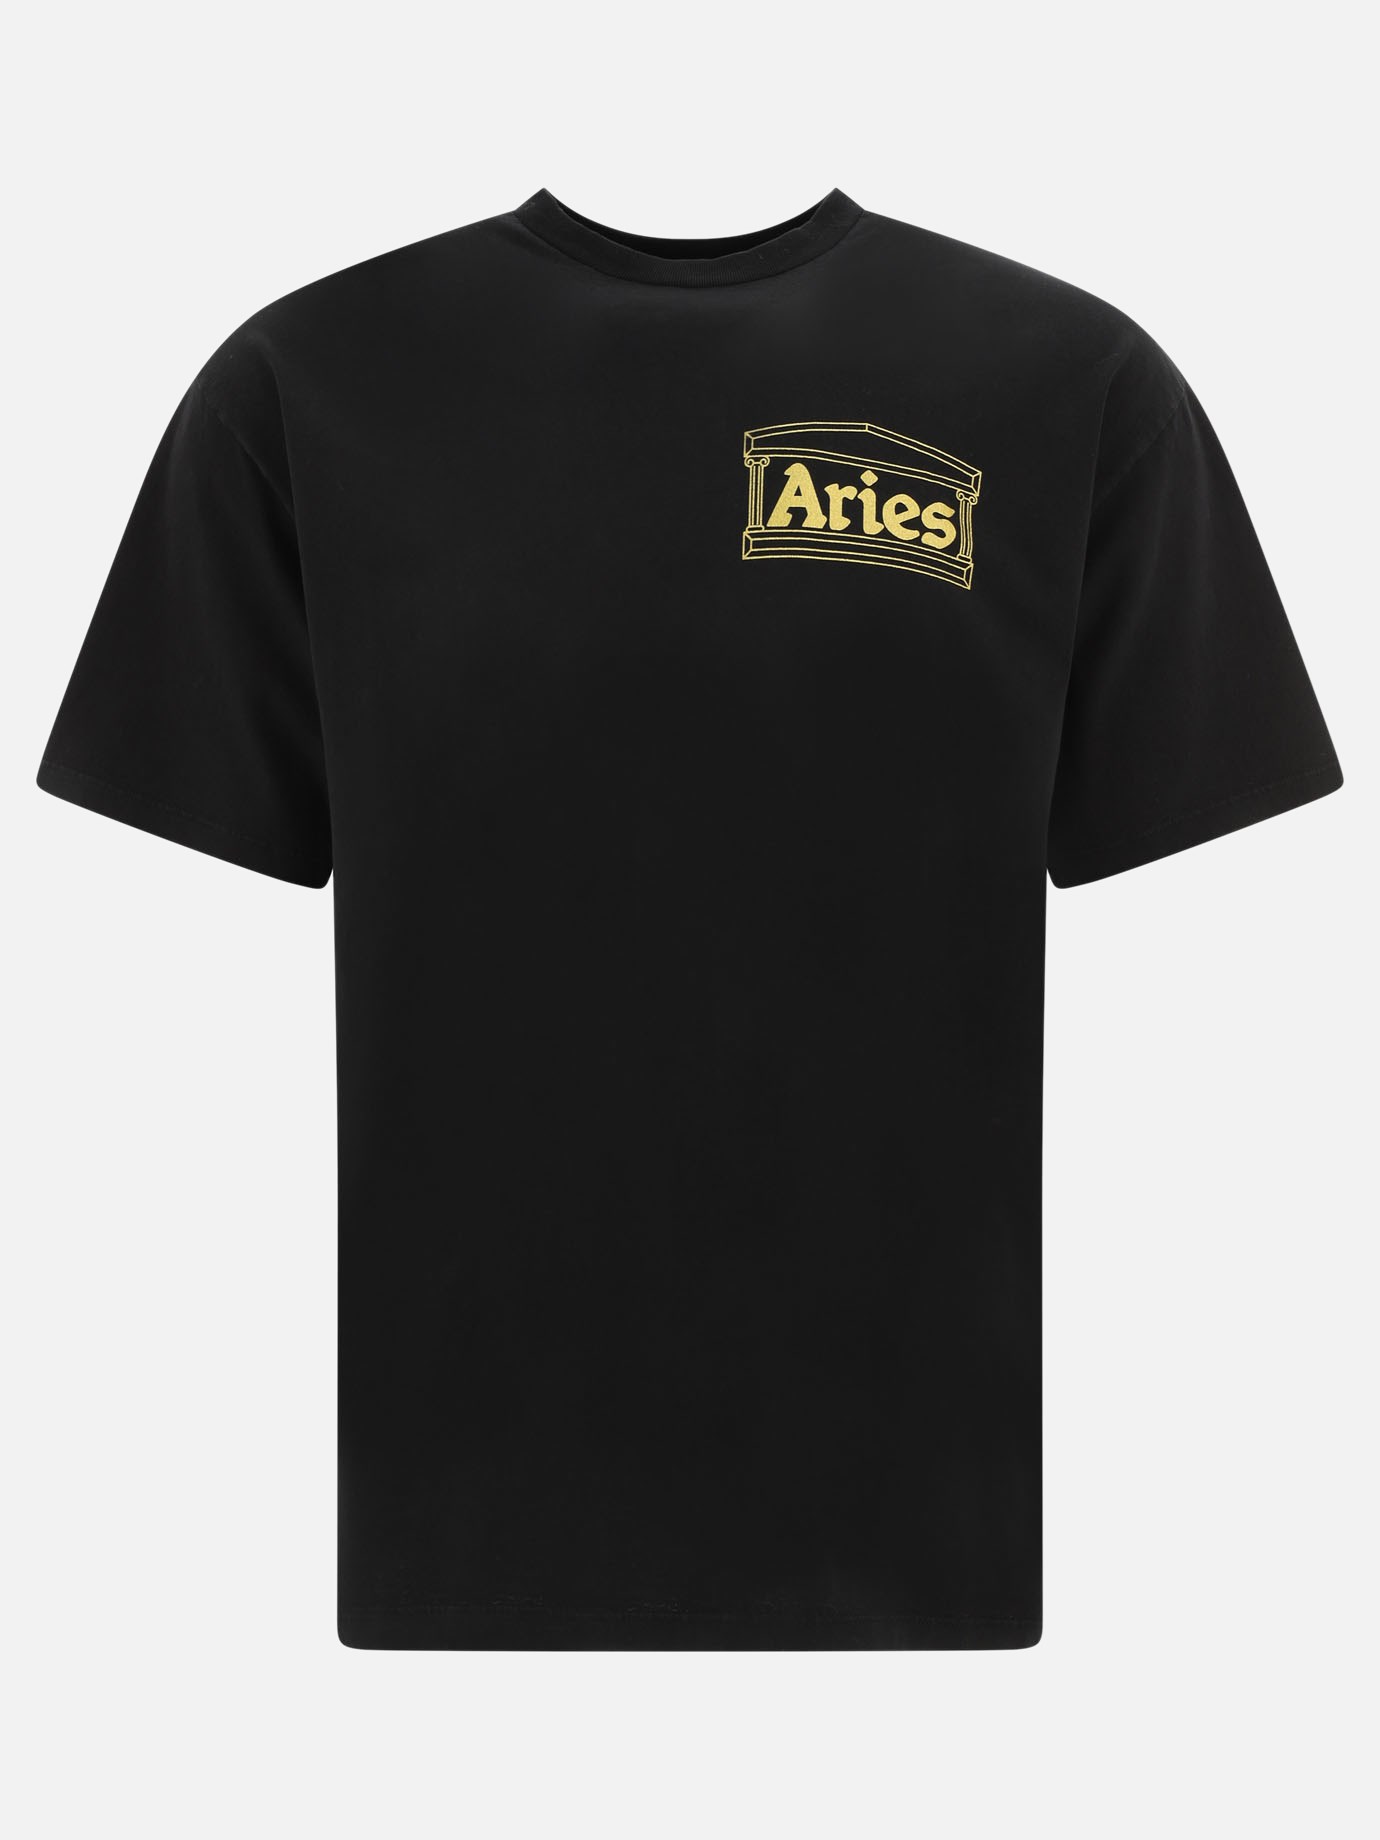  Temple  t-shirtby Aries - 0